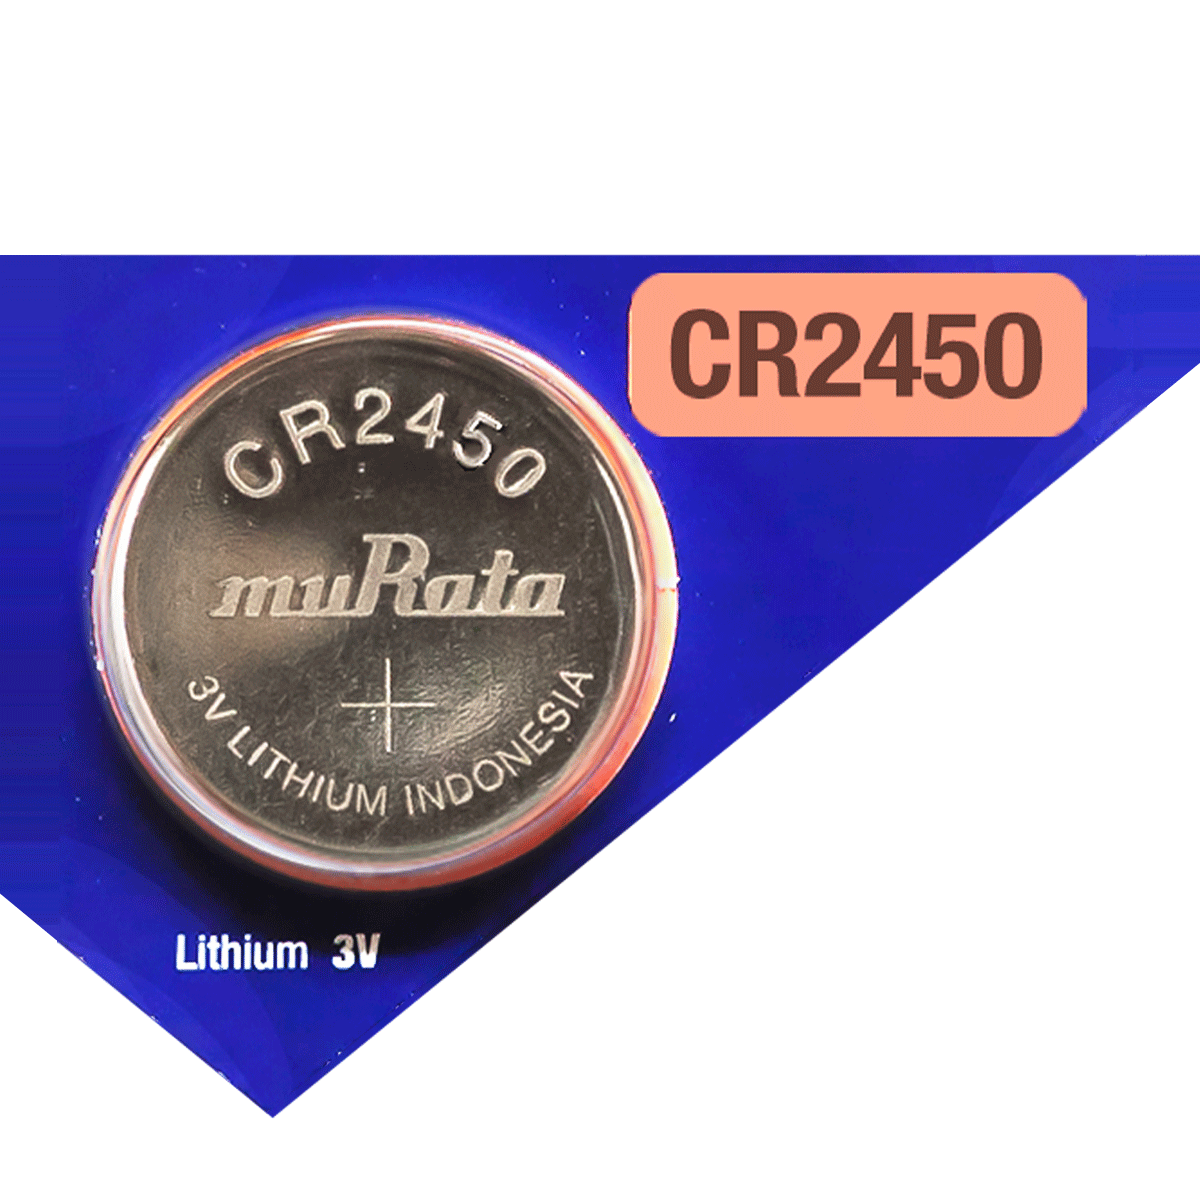 Murata CR2450 Battery 3V Lithium Coin Cell (1 pc) (formerly SONY) 